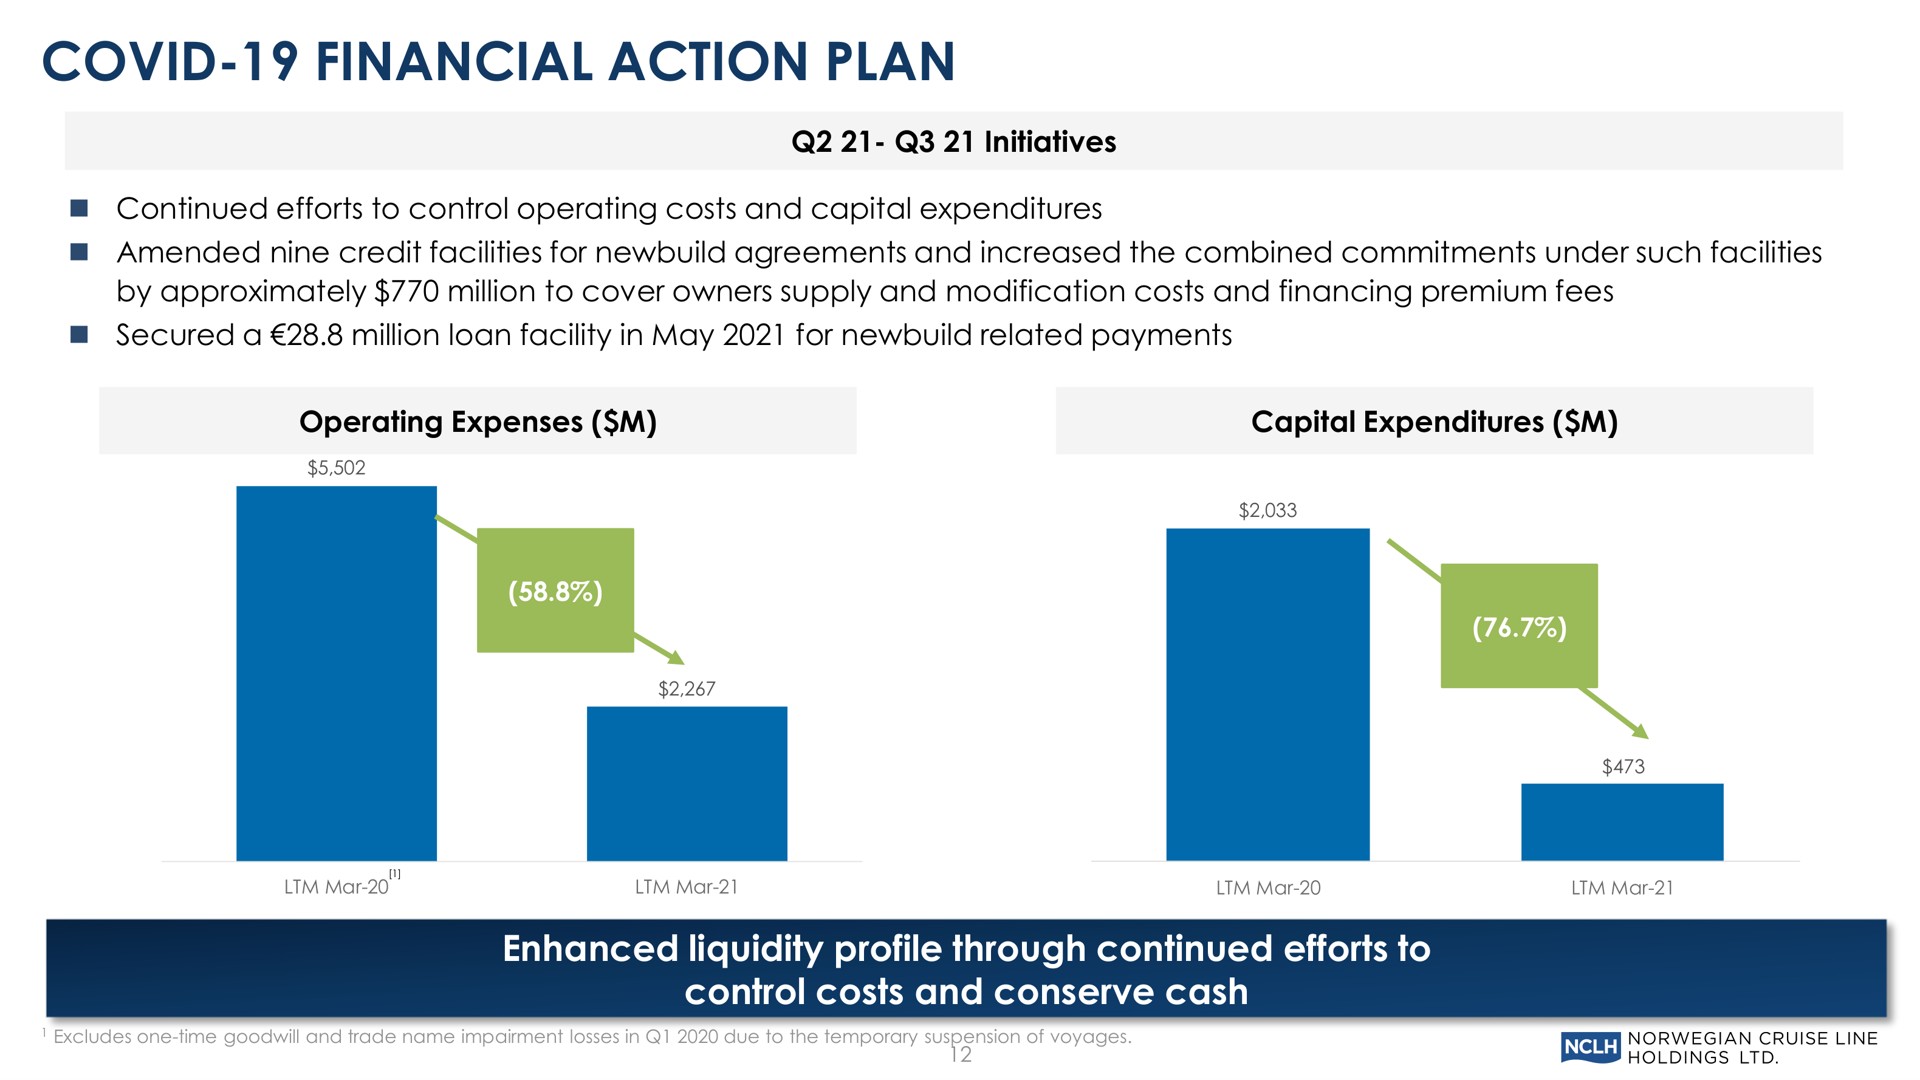 covid financial action plan enhanced liquidity profile through continued efforts to control costs and conserve cash | Norwegian Cruise Line